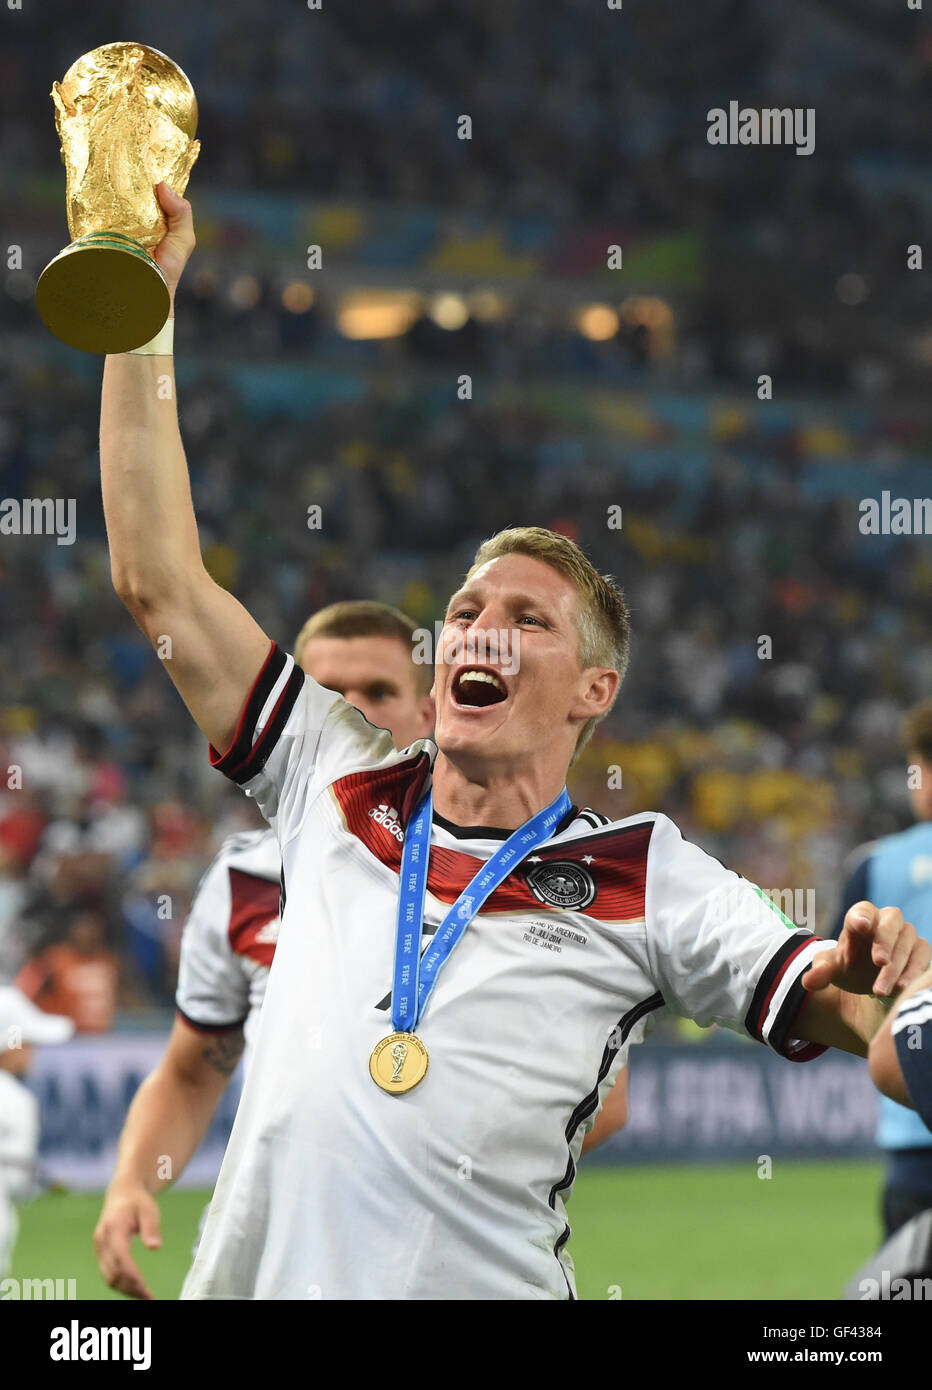 Rio de Janeiro, Brazil. 13th July, 2014. Bastian Schweinsteiger of Germany poses with the World Cup trophy after winning the FIFA World Cup 2014 final soccer match between Germany and Argentina at the Estadio do Maracana in Rio de Janeiro, Brazil, 13 July 2014. Photo: Andreas Gebert/dpa/Alamy Live News Stock Photo